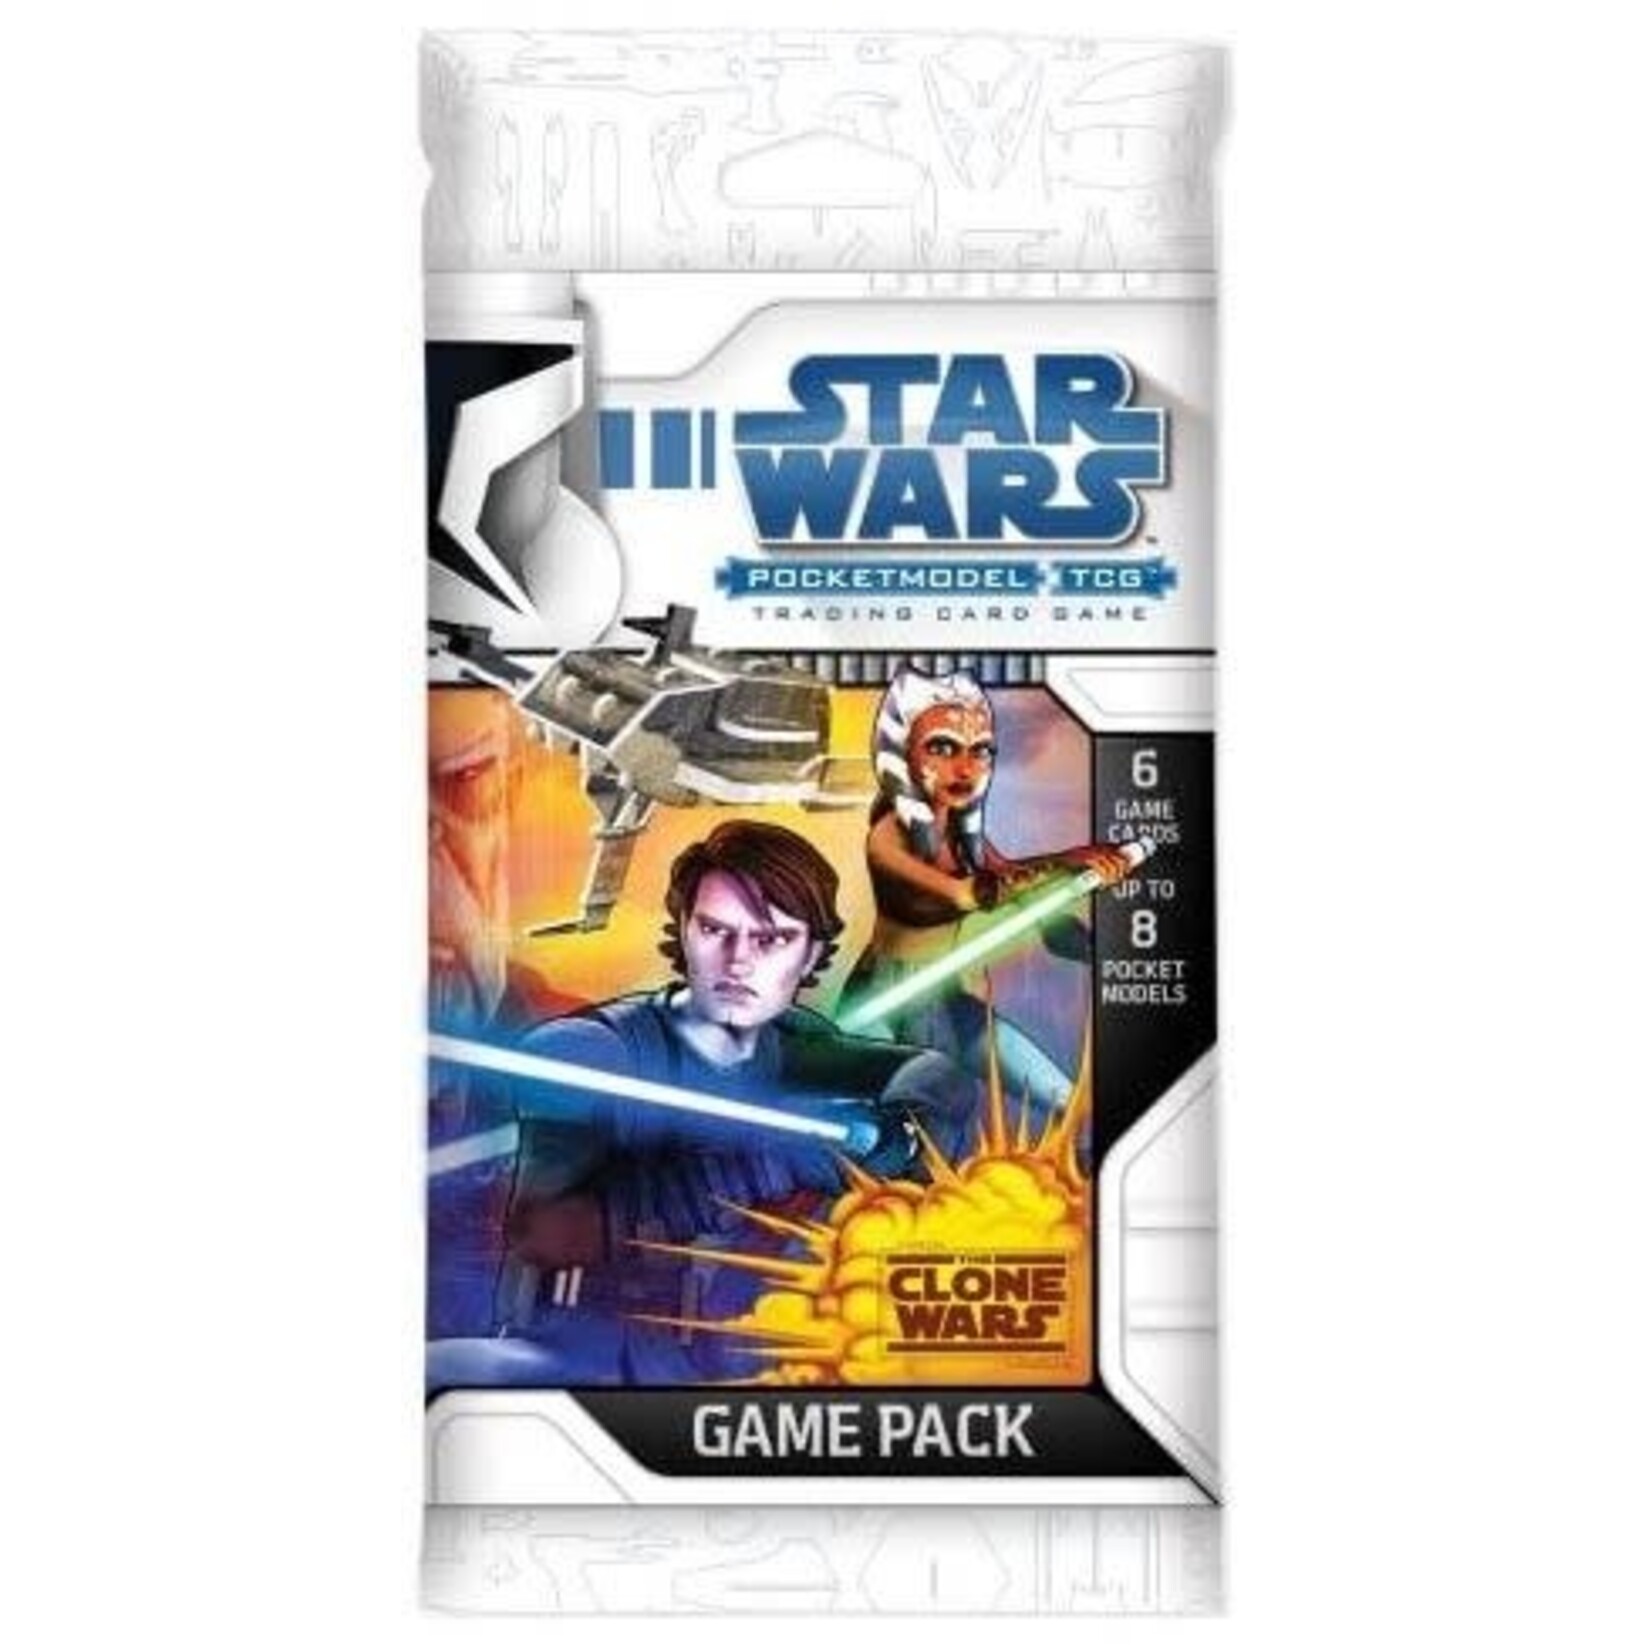 #17173 Star Wars Pocket Model Trading Card Game (4 Packs) Clone Wars Dragon Cache Used Game